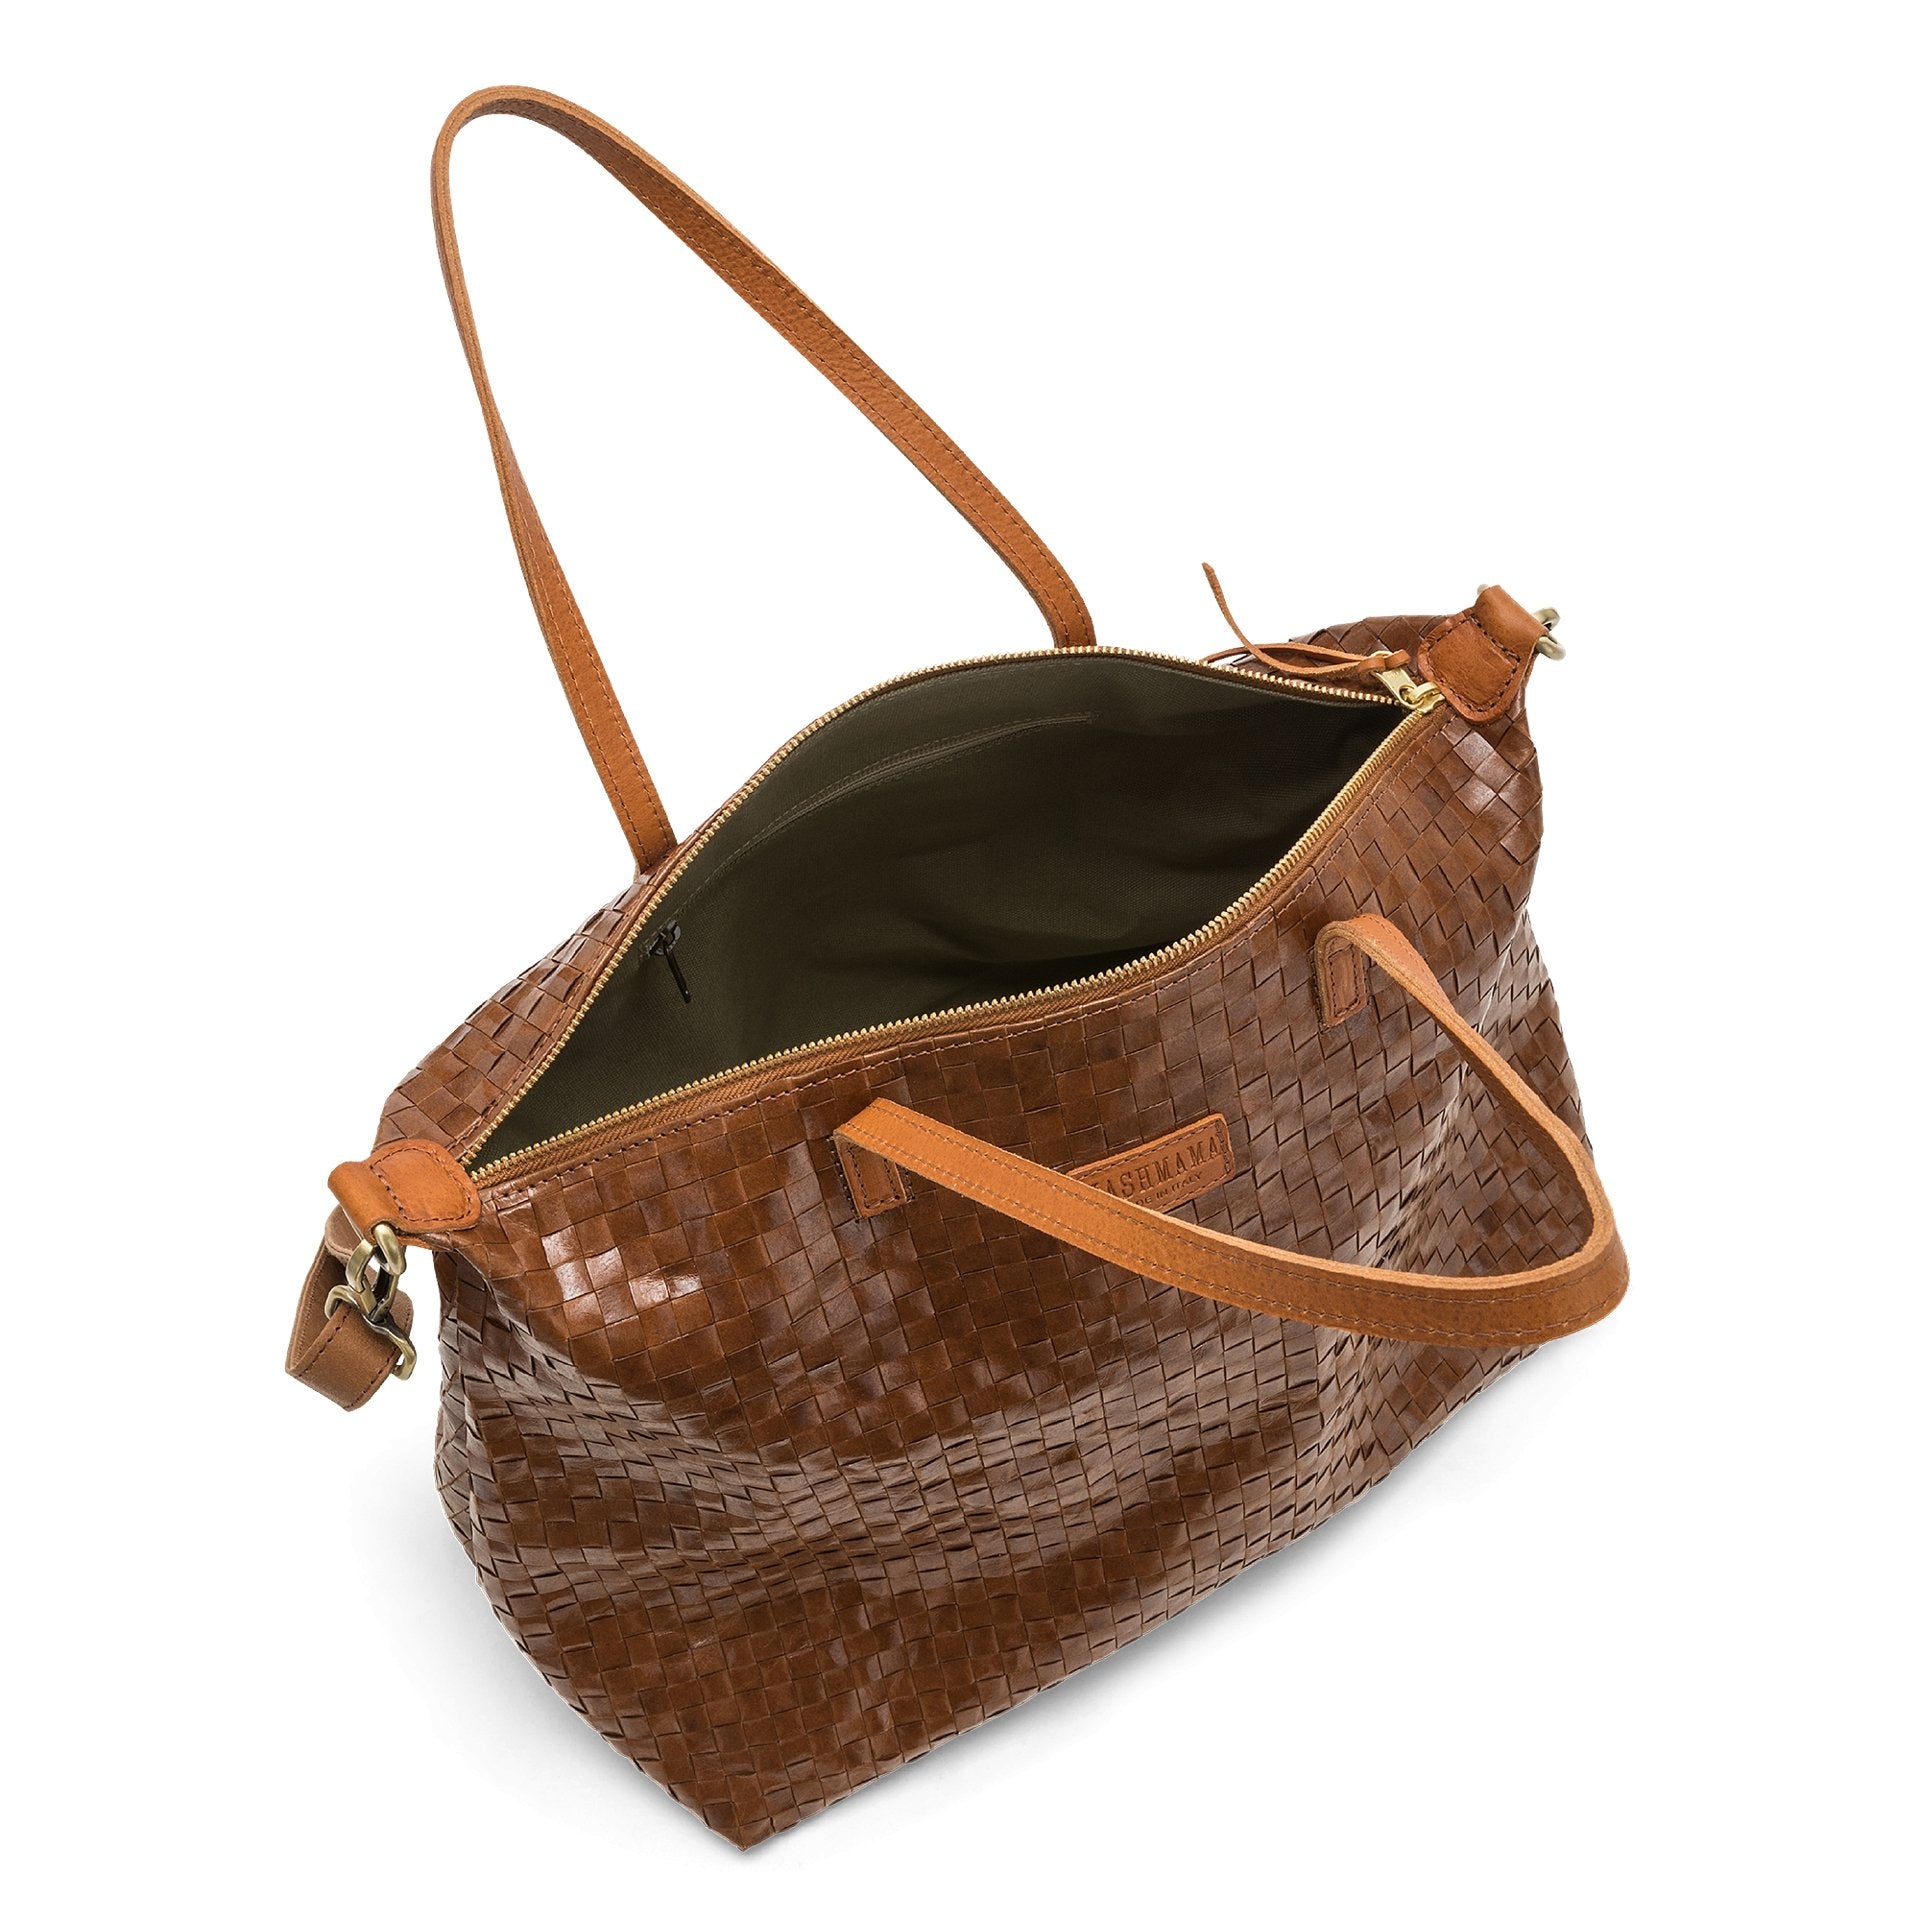 A large brown woven top handle bag is shown open and unzipped from the top angle. It displays a khaki lining and a zip pocket.